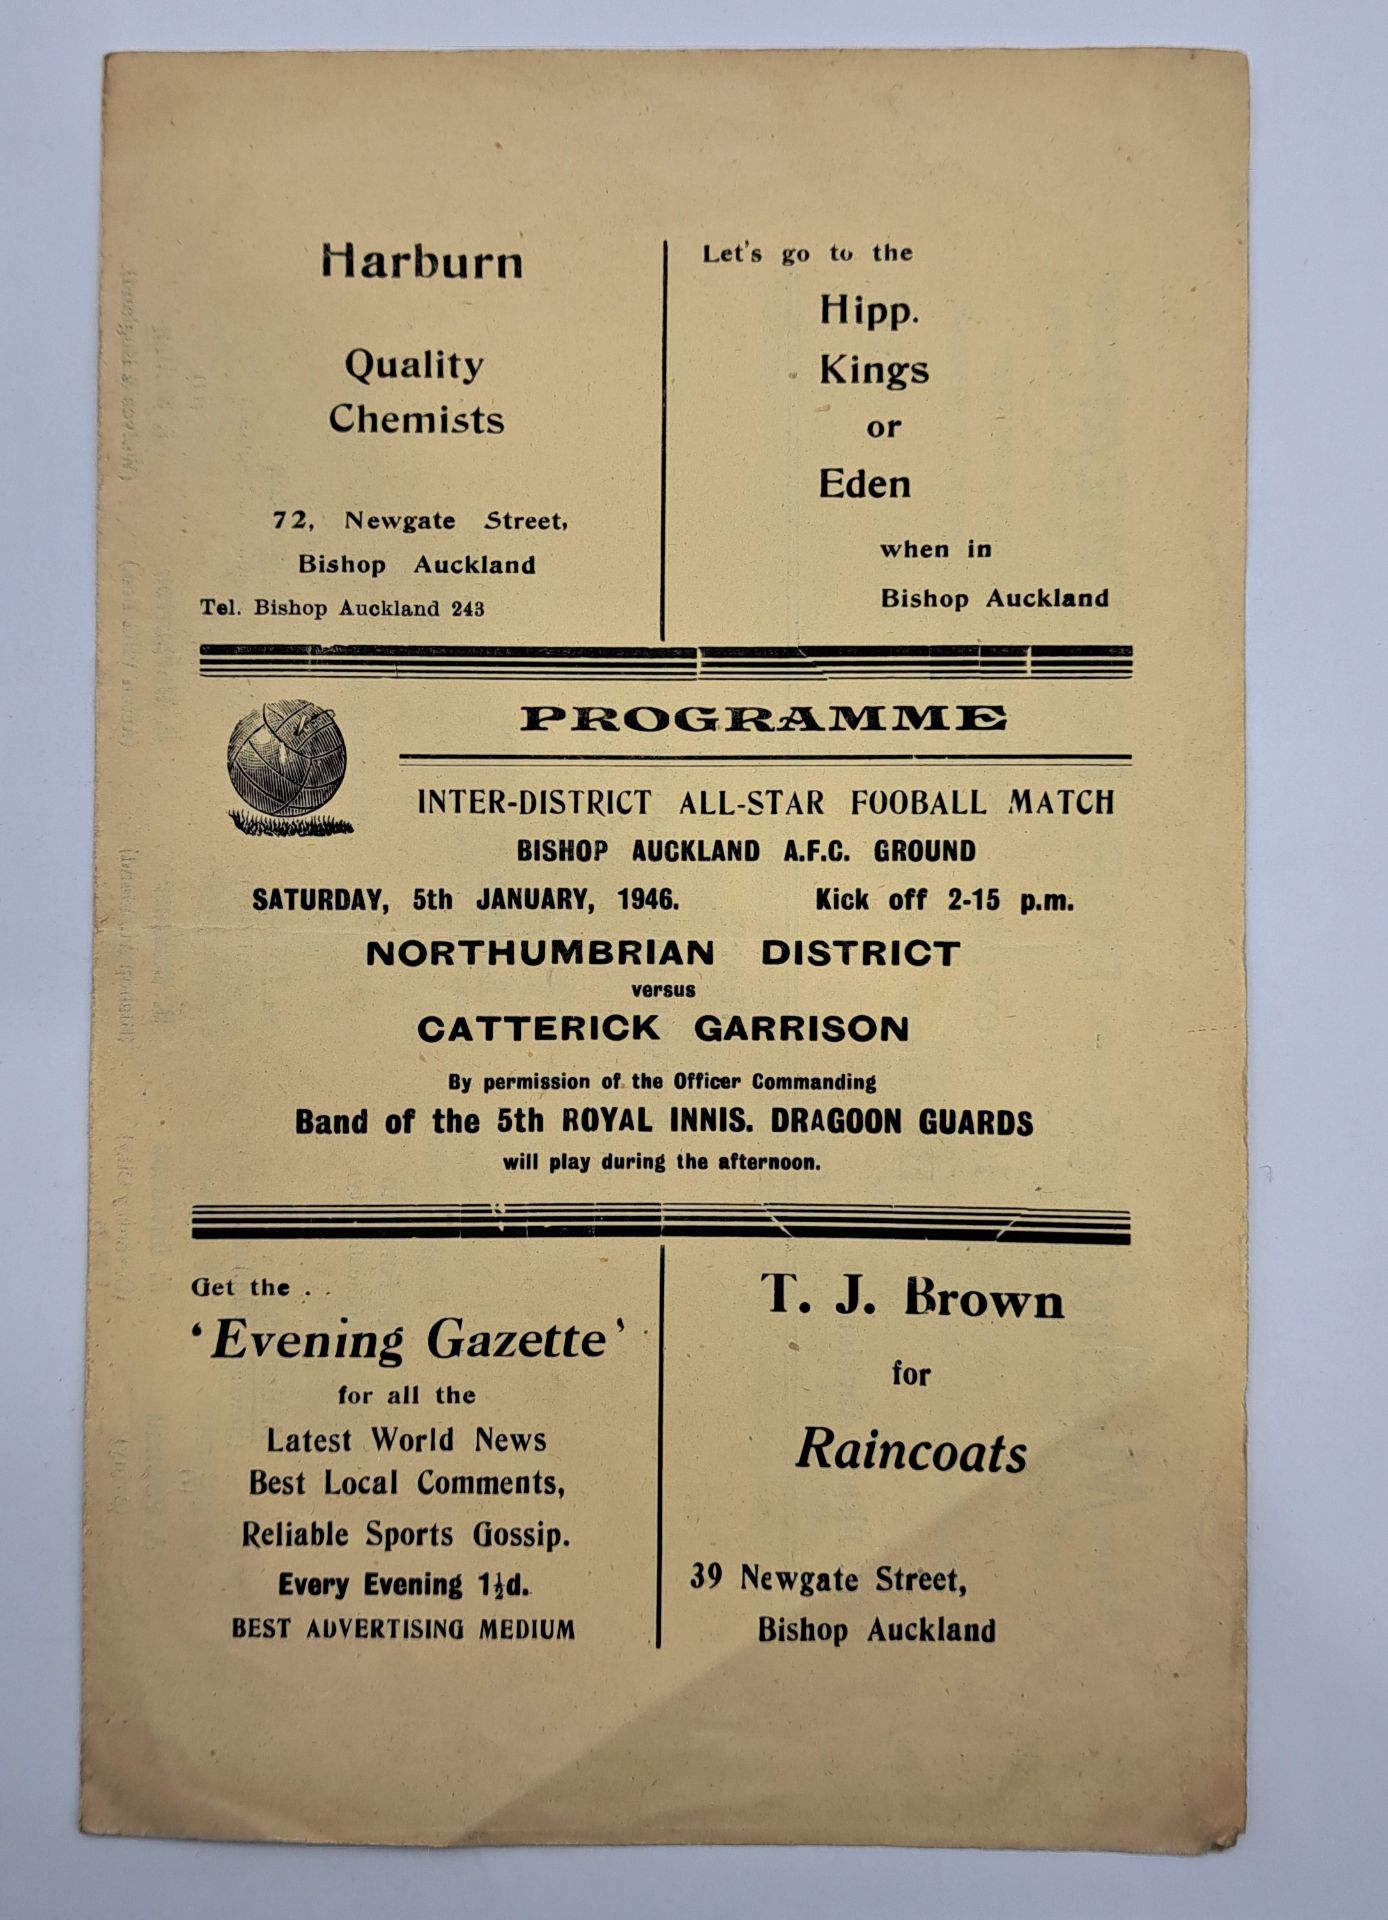 Bishop Auckland early 1940's Football Programme. An Inter District All-Star Football